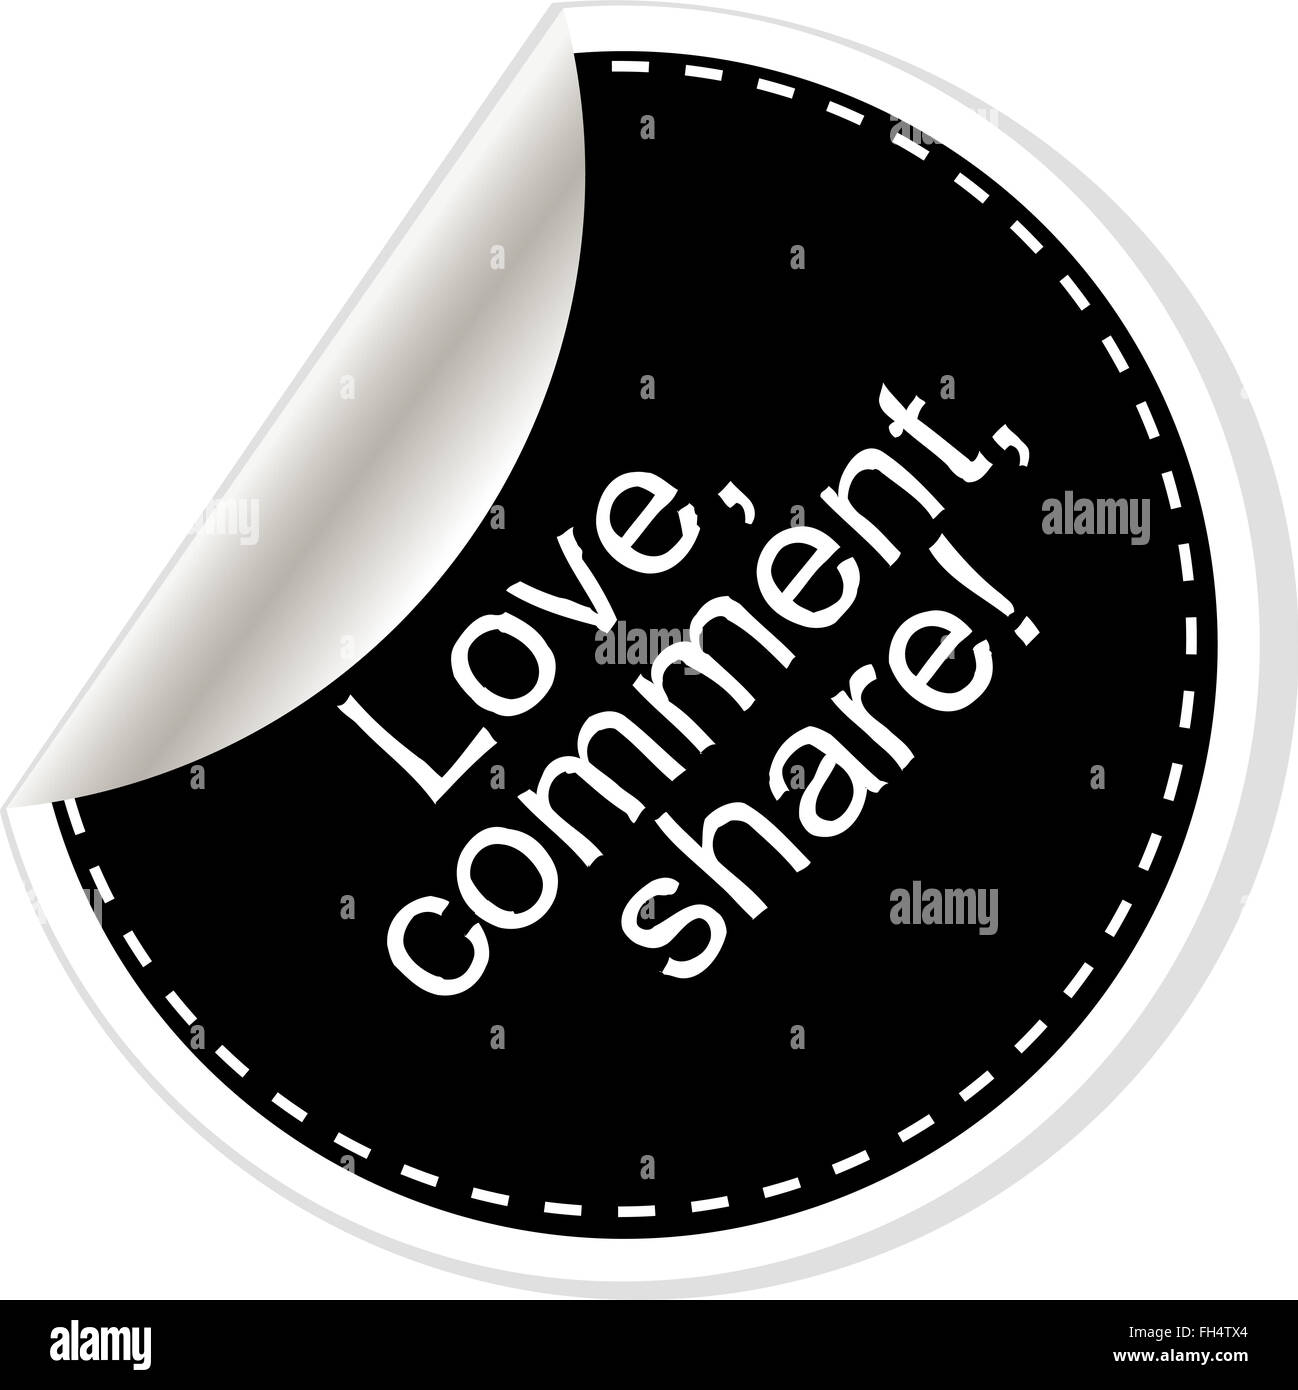 Love. Comment. Share. Inspirational motivational quote. Simple trendy design. Black and white stickers. Vector illustration Stock Photo